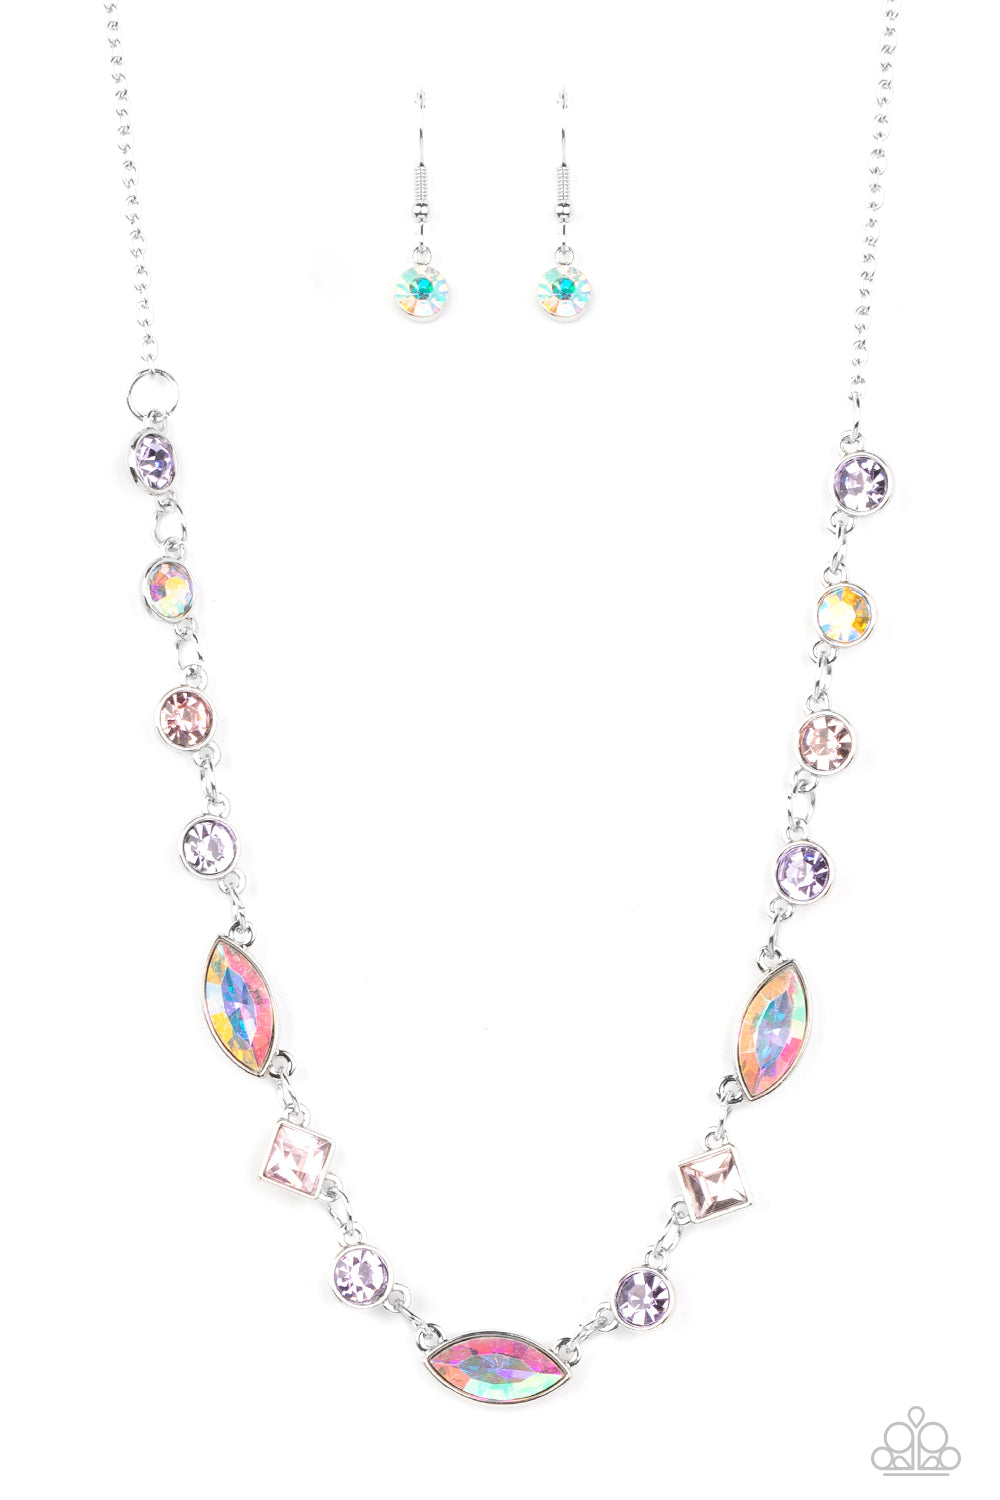 Irresistible HEIR-idescence - Multi necklace D061